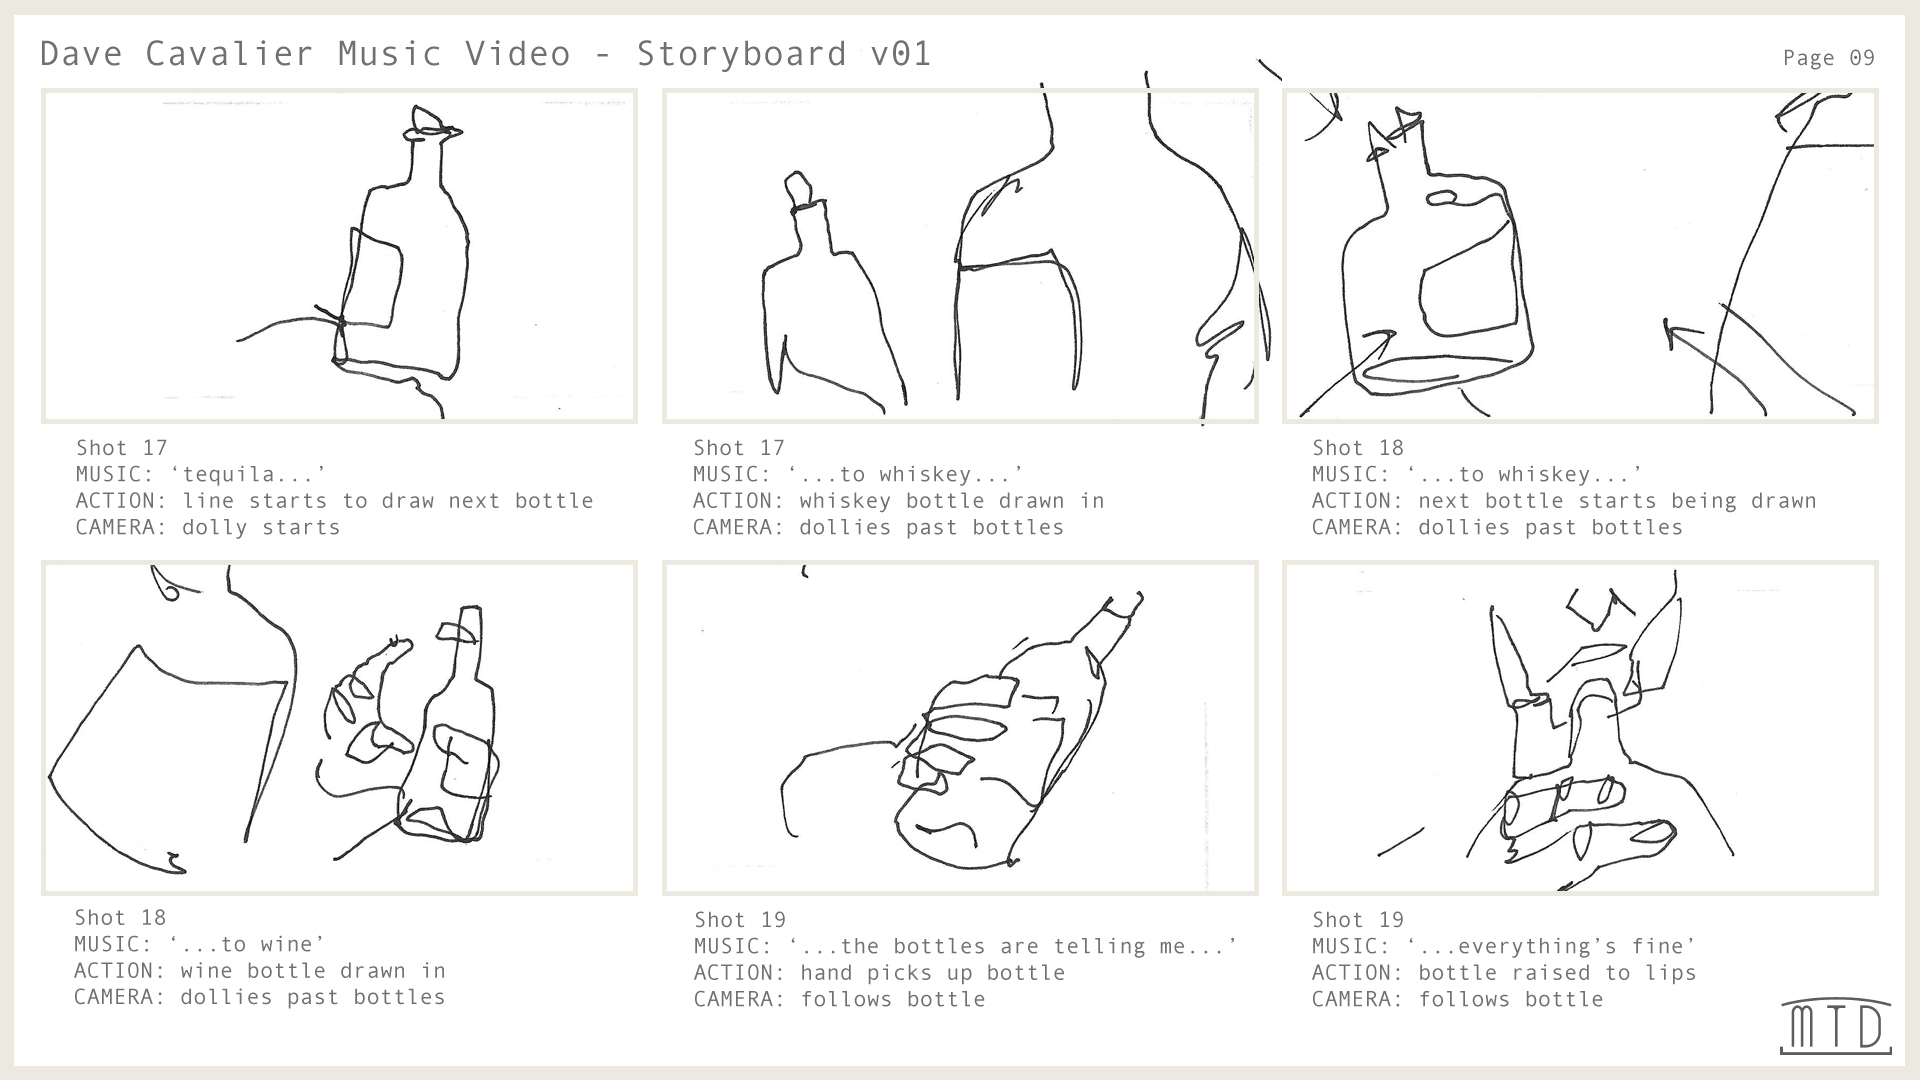 The Hold storyboard page 9